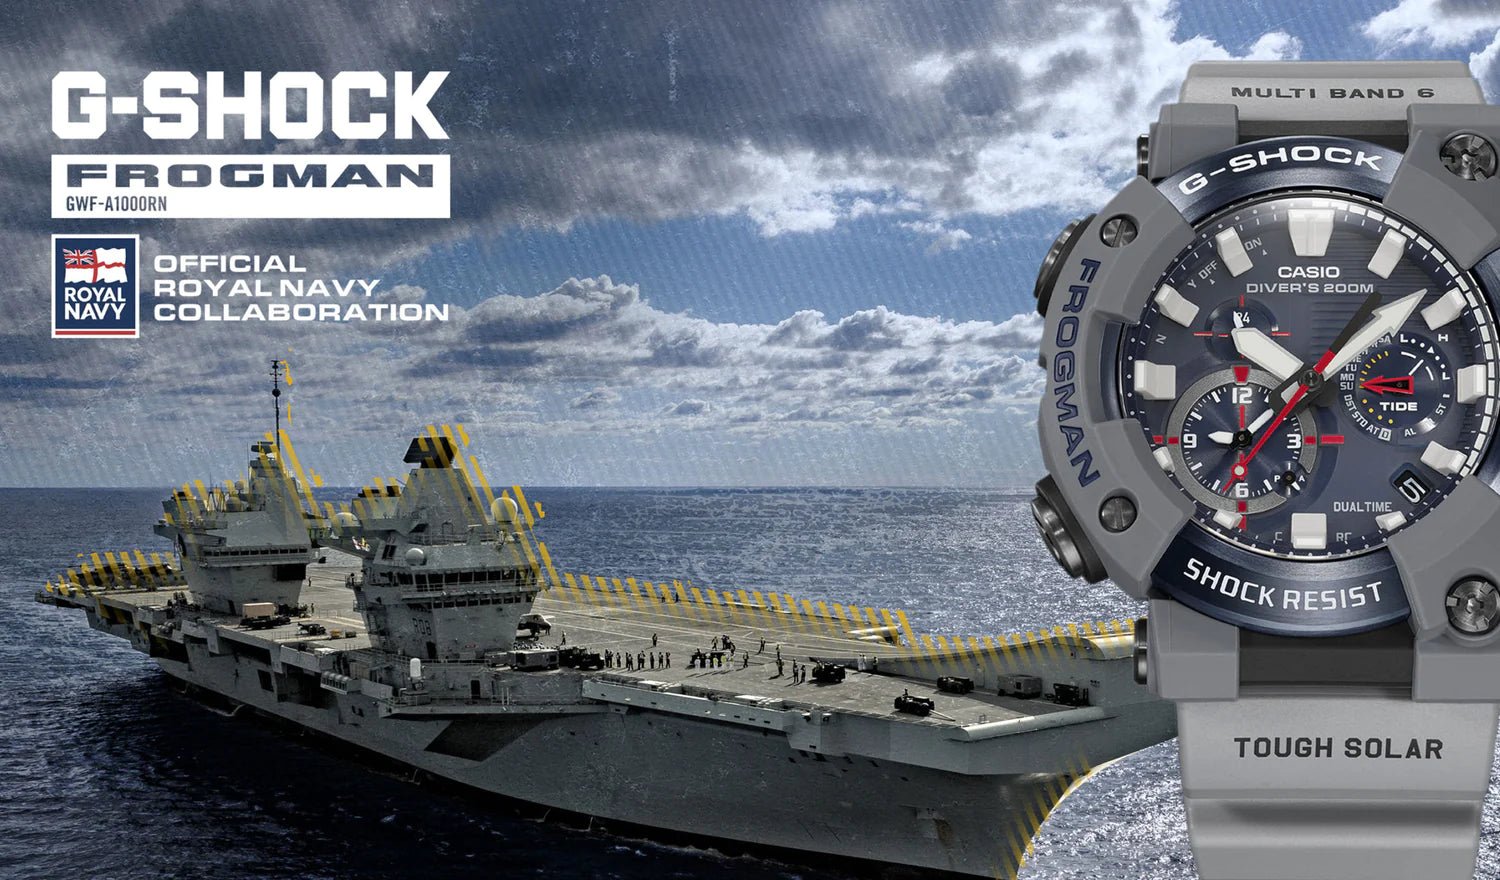 The G-Shock Royal Navy Frogman is the ultimate divers watch! - CASIO Australia